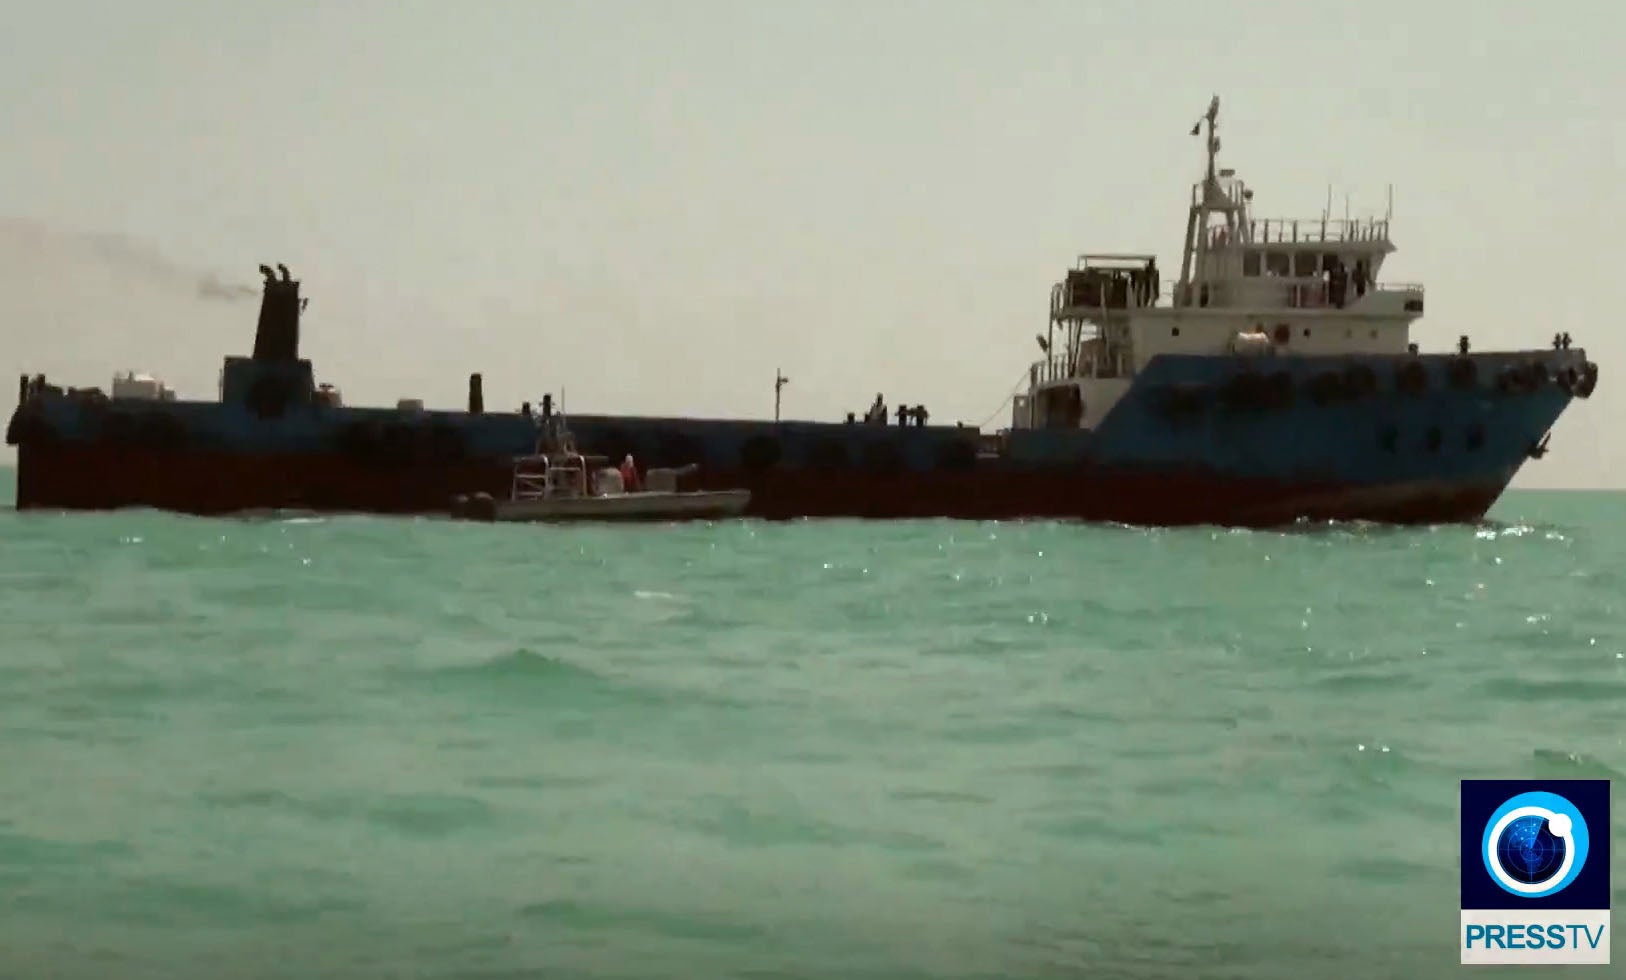 Footage released by Iranian TV of the captured fuel tanker